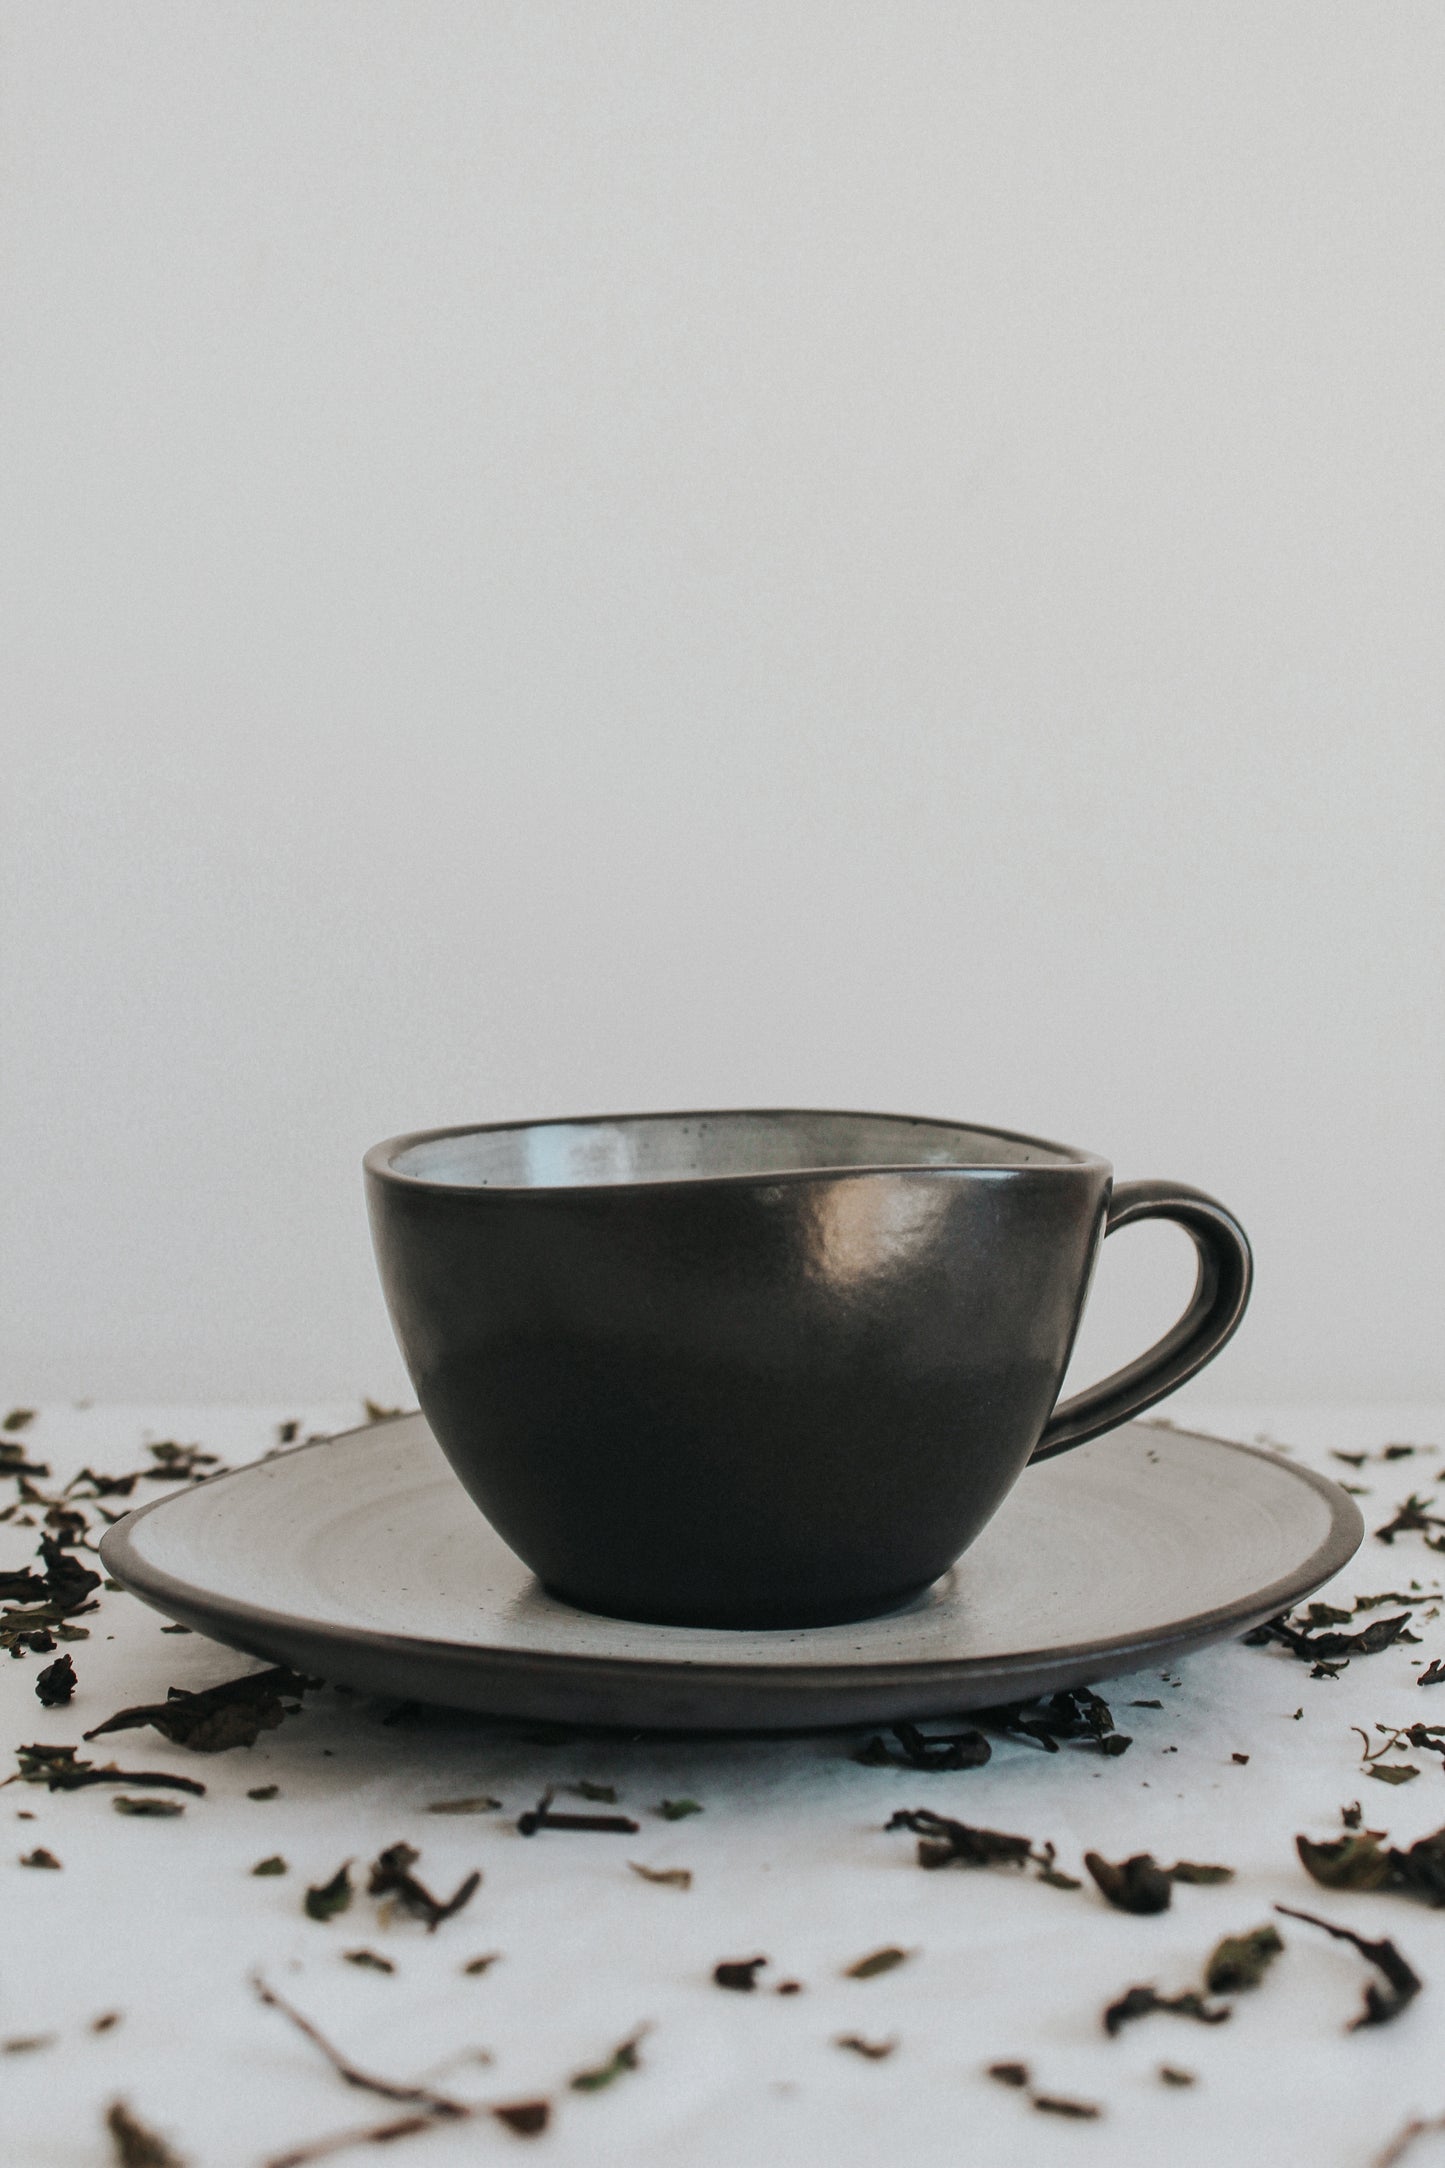 Stormy cup and saucer